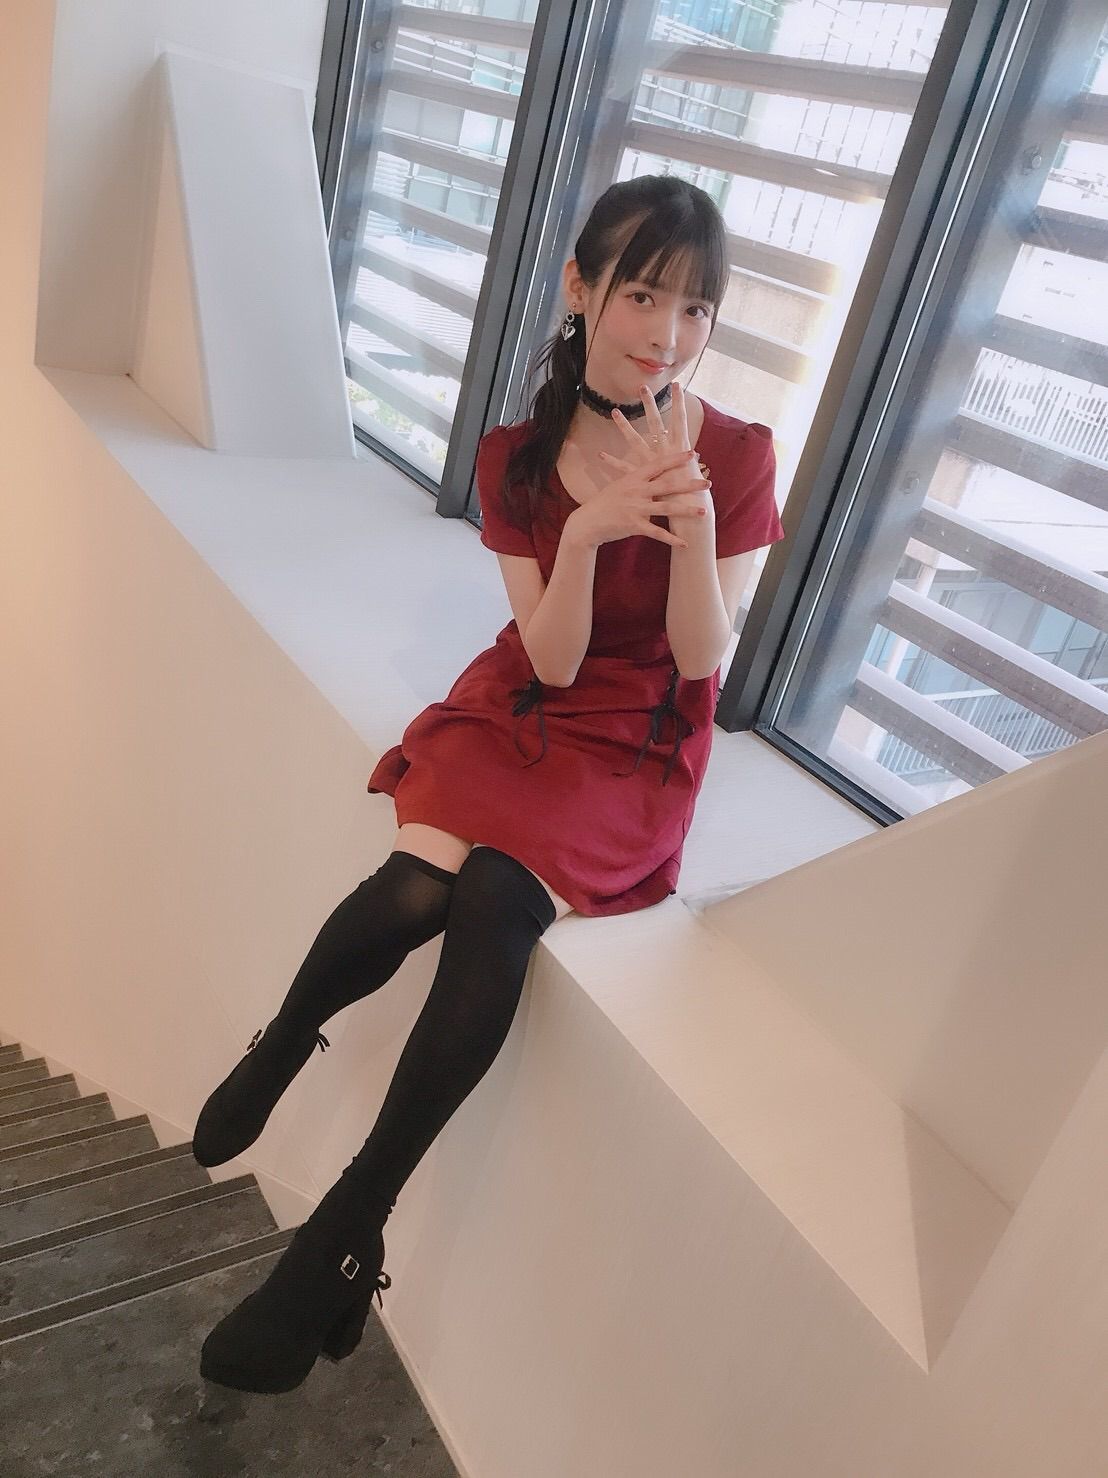 Sumire Uesaka "to emphasize the thigh... W] also erotic image offer Wwwwwww 2